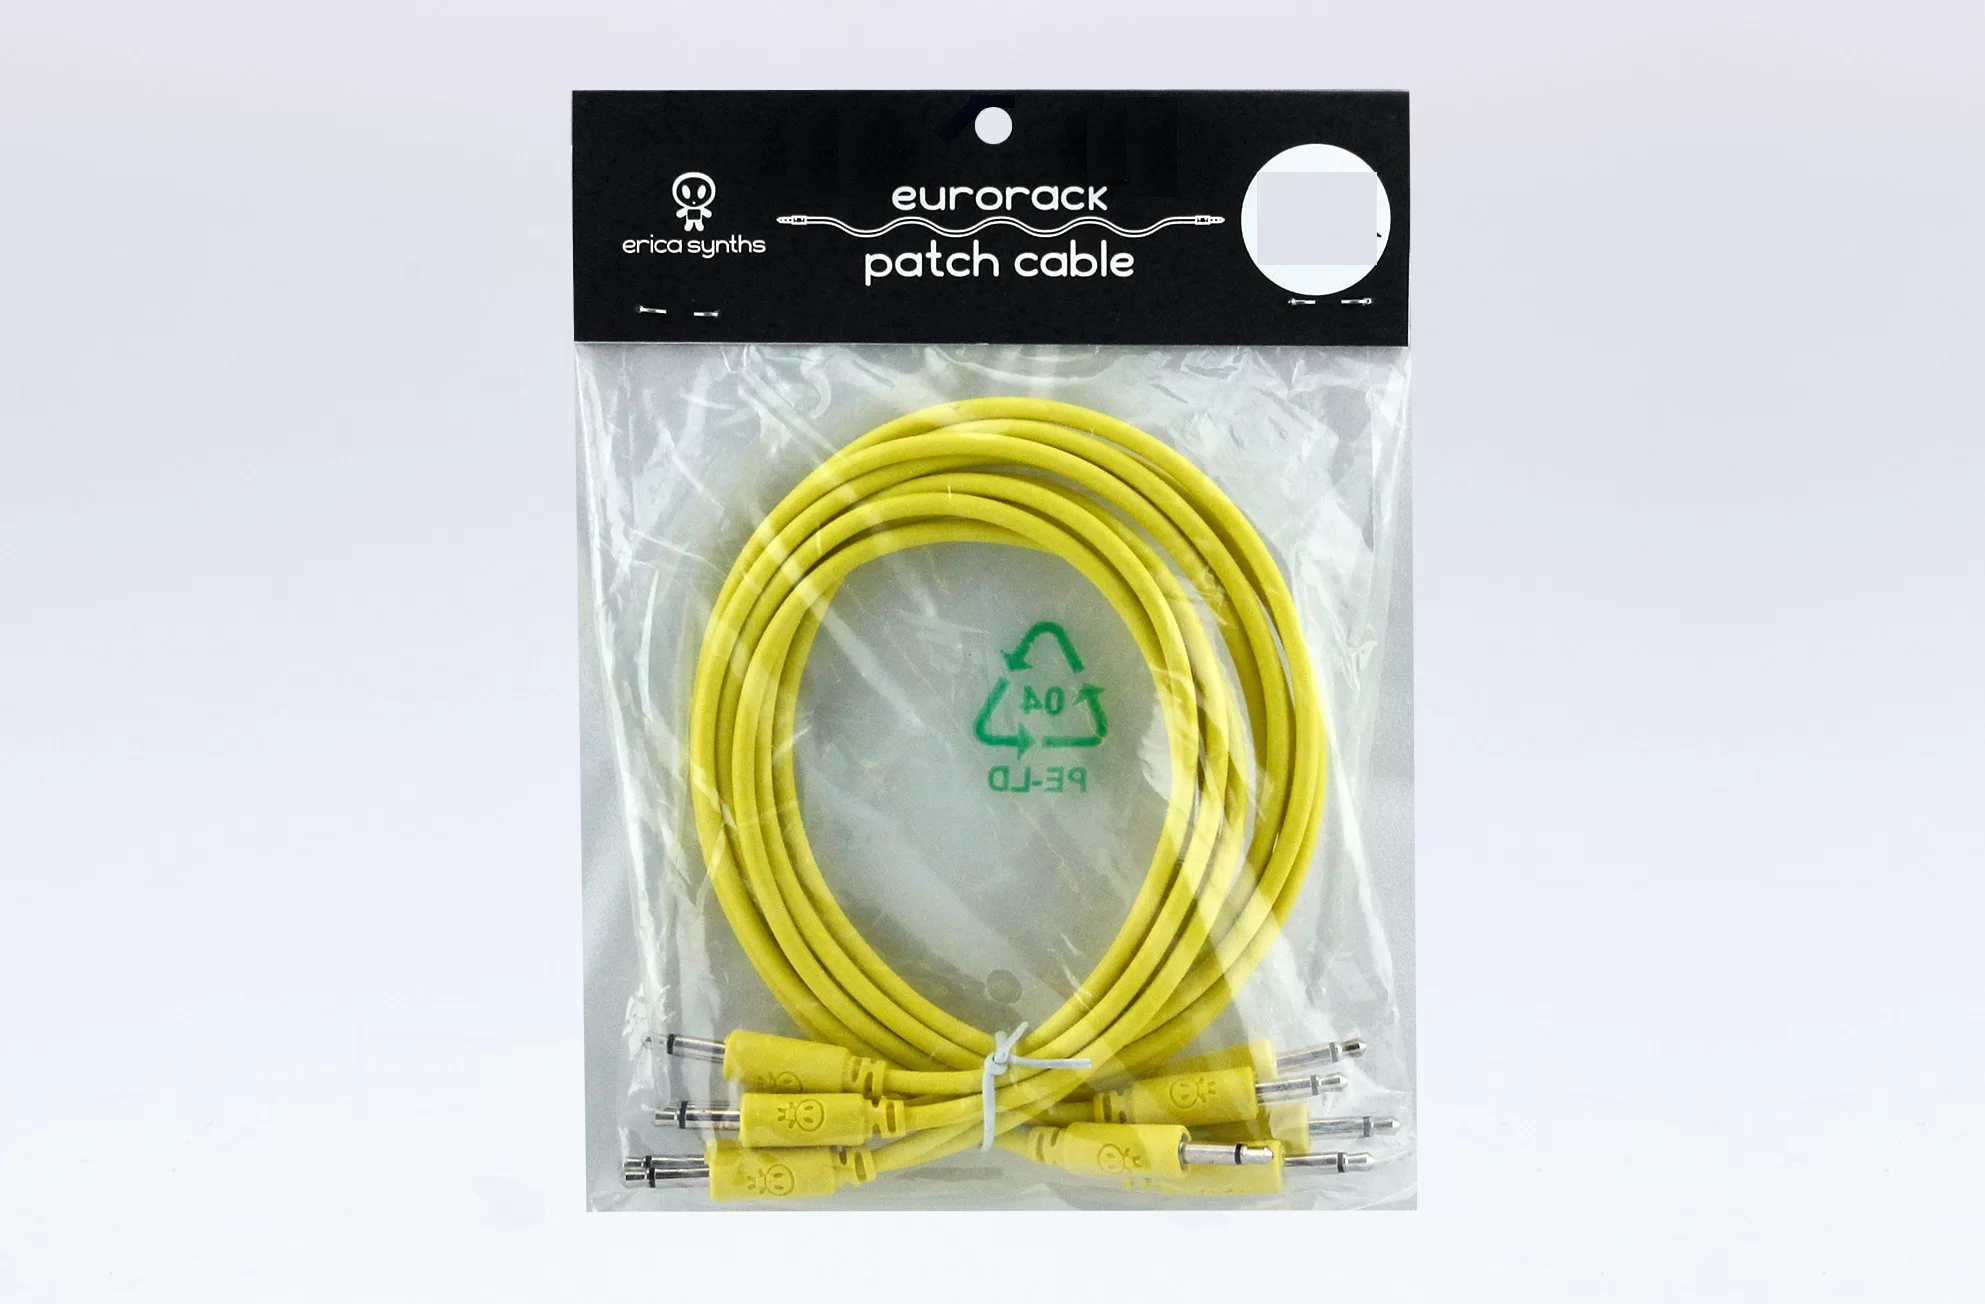 Erica Synths Eurorack patch cables 10cm (5 stk) - Rød